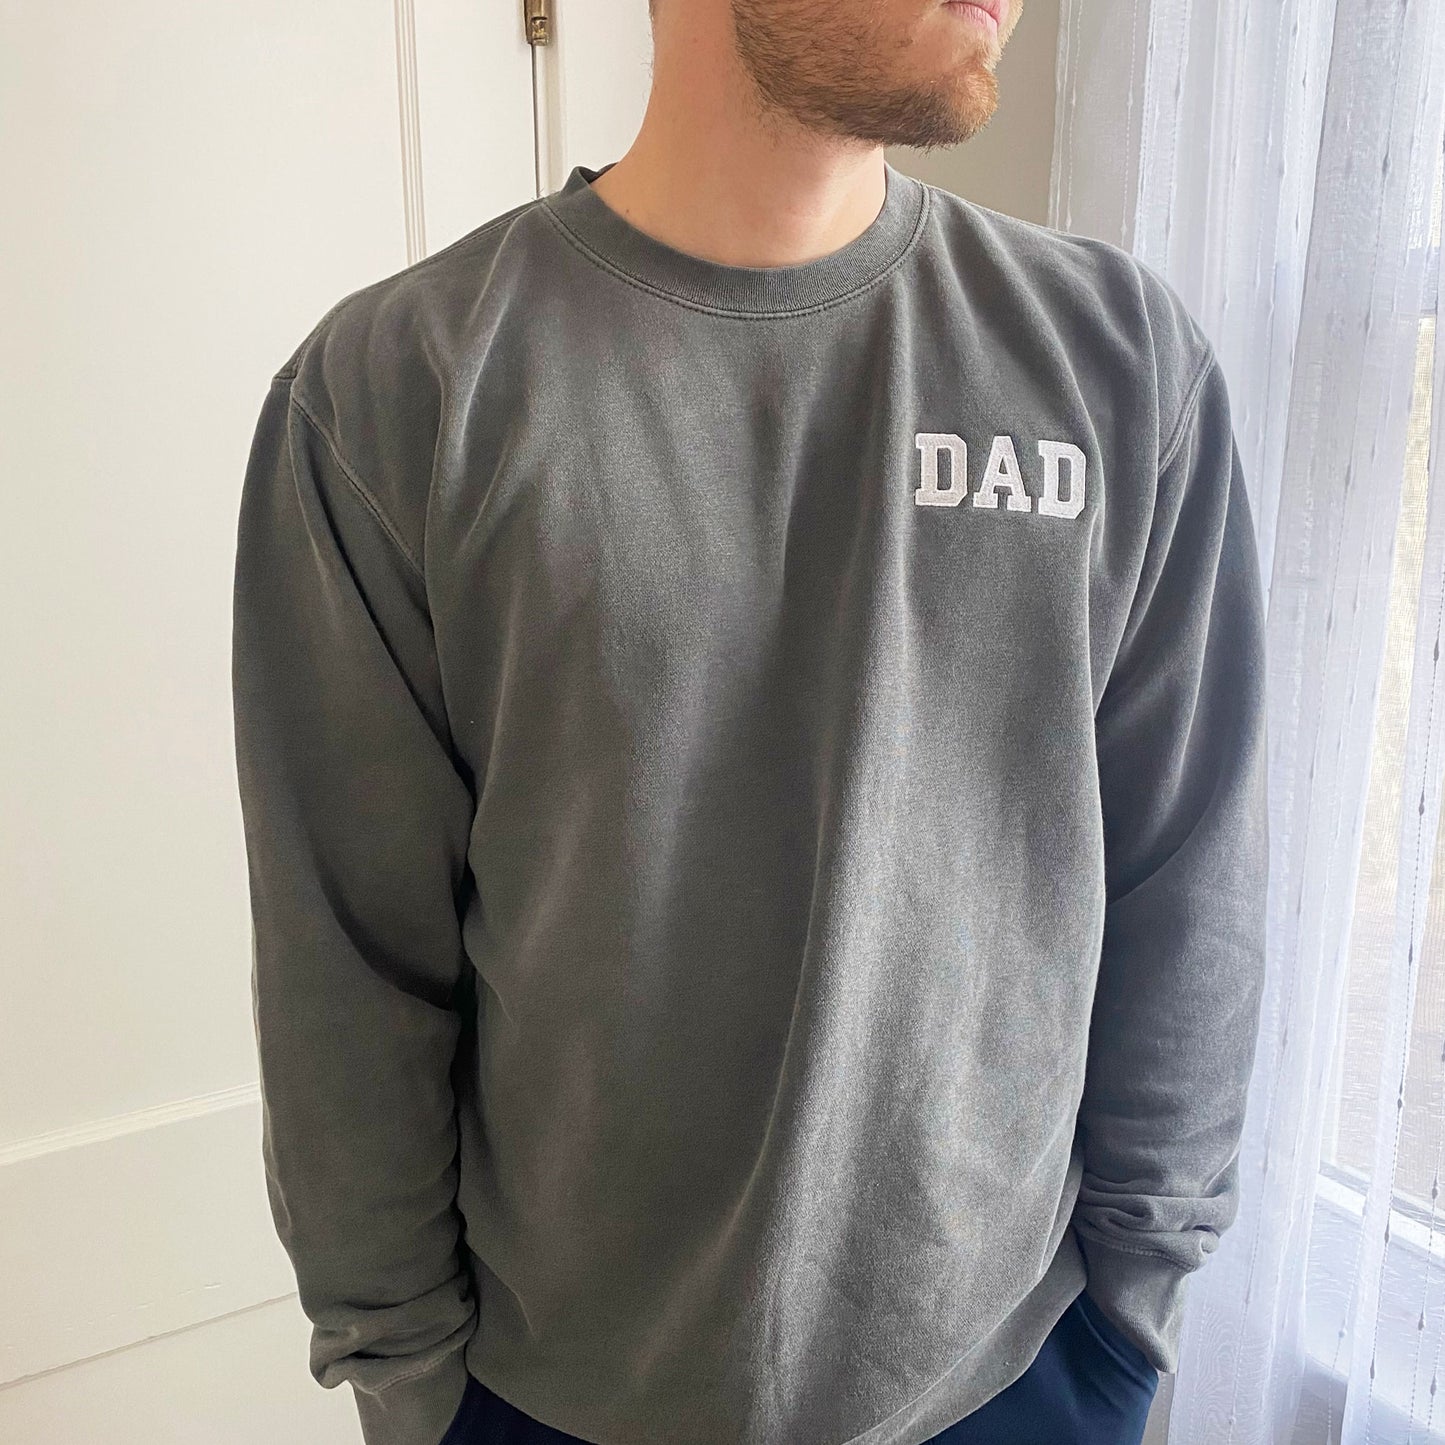 Man wearing pigment black sweatshirt with white dad embroidered text